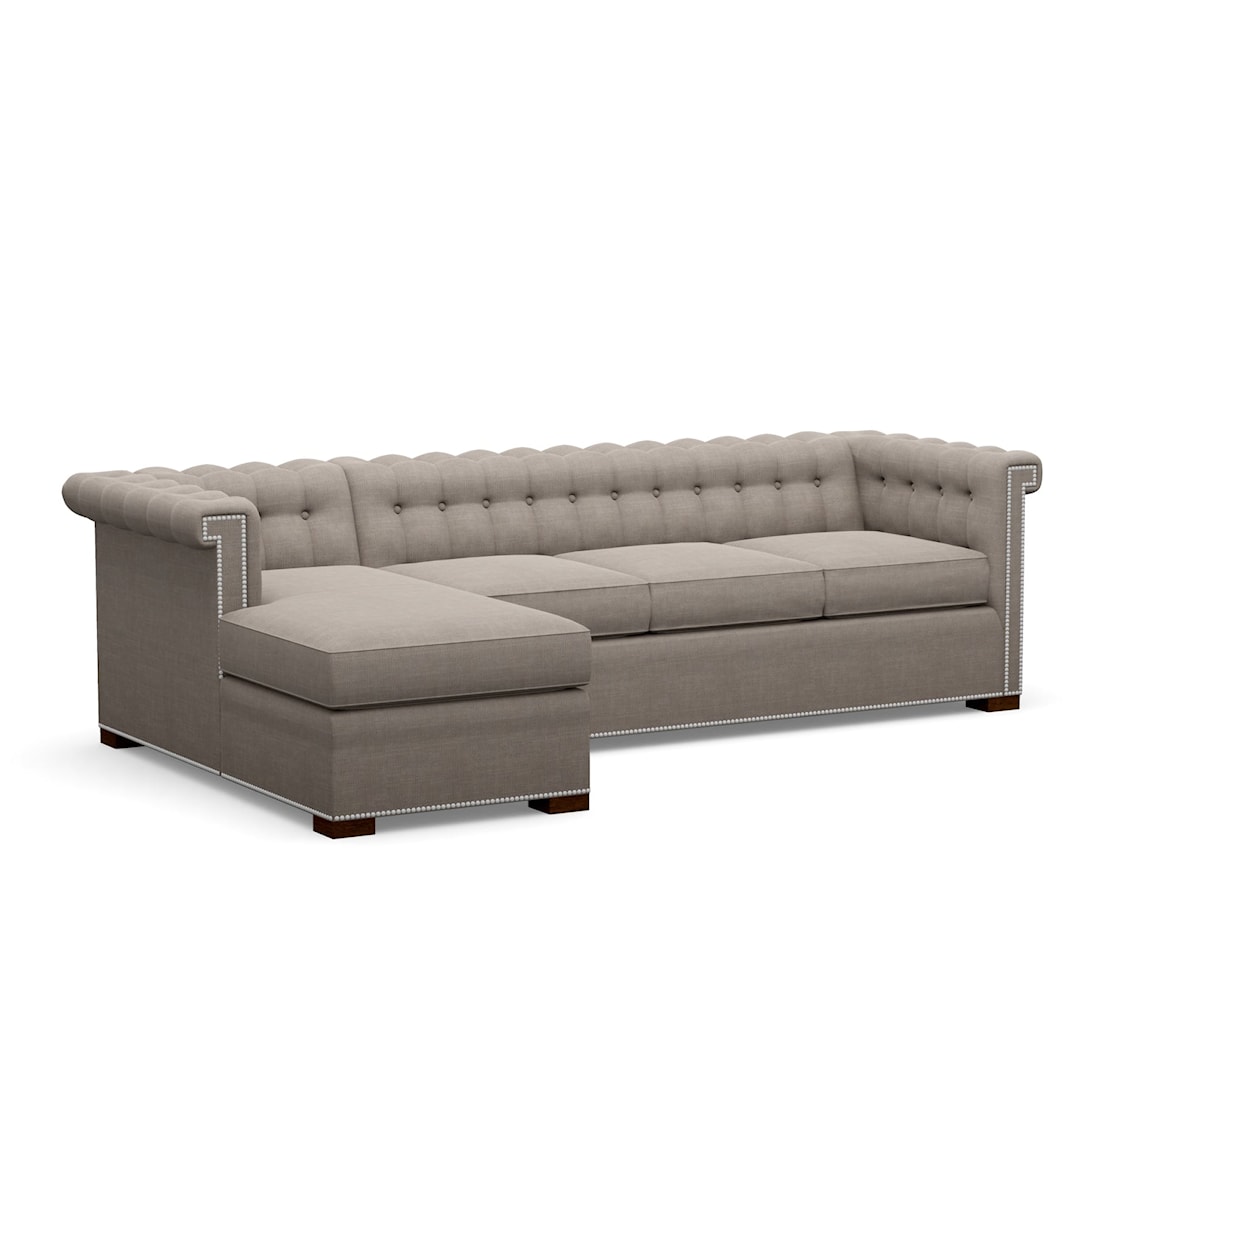 Century Chesterfield 2-Piece Chaise Sectional Sofa